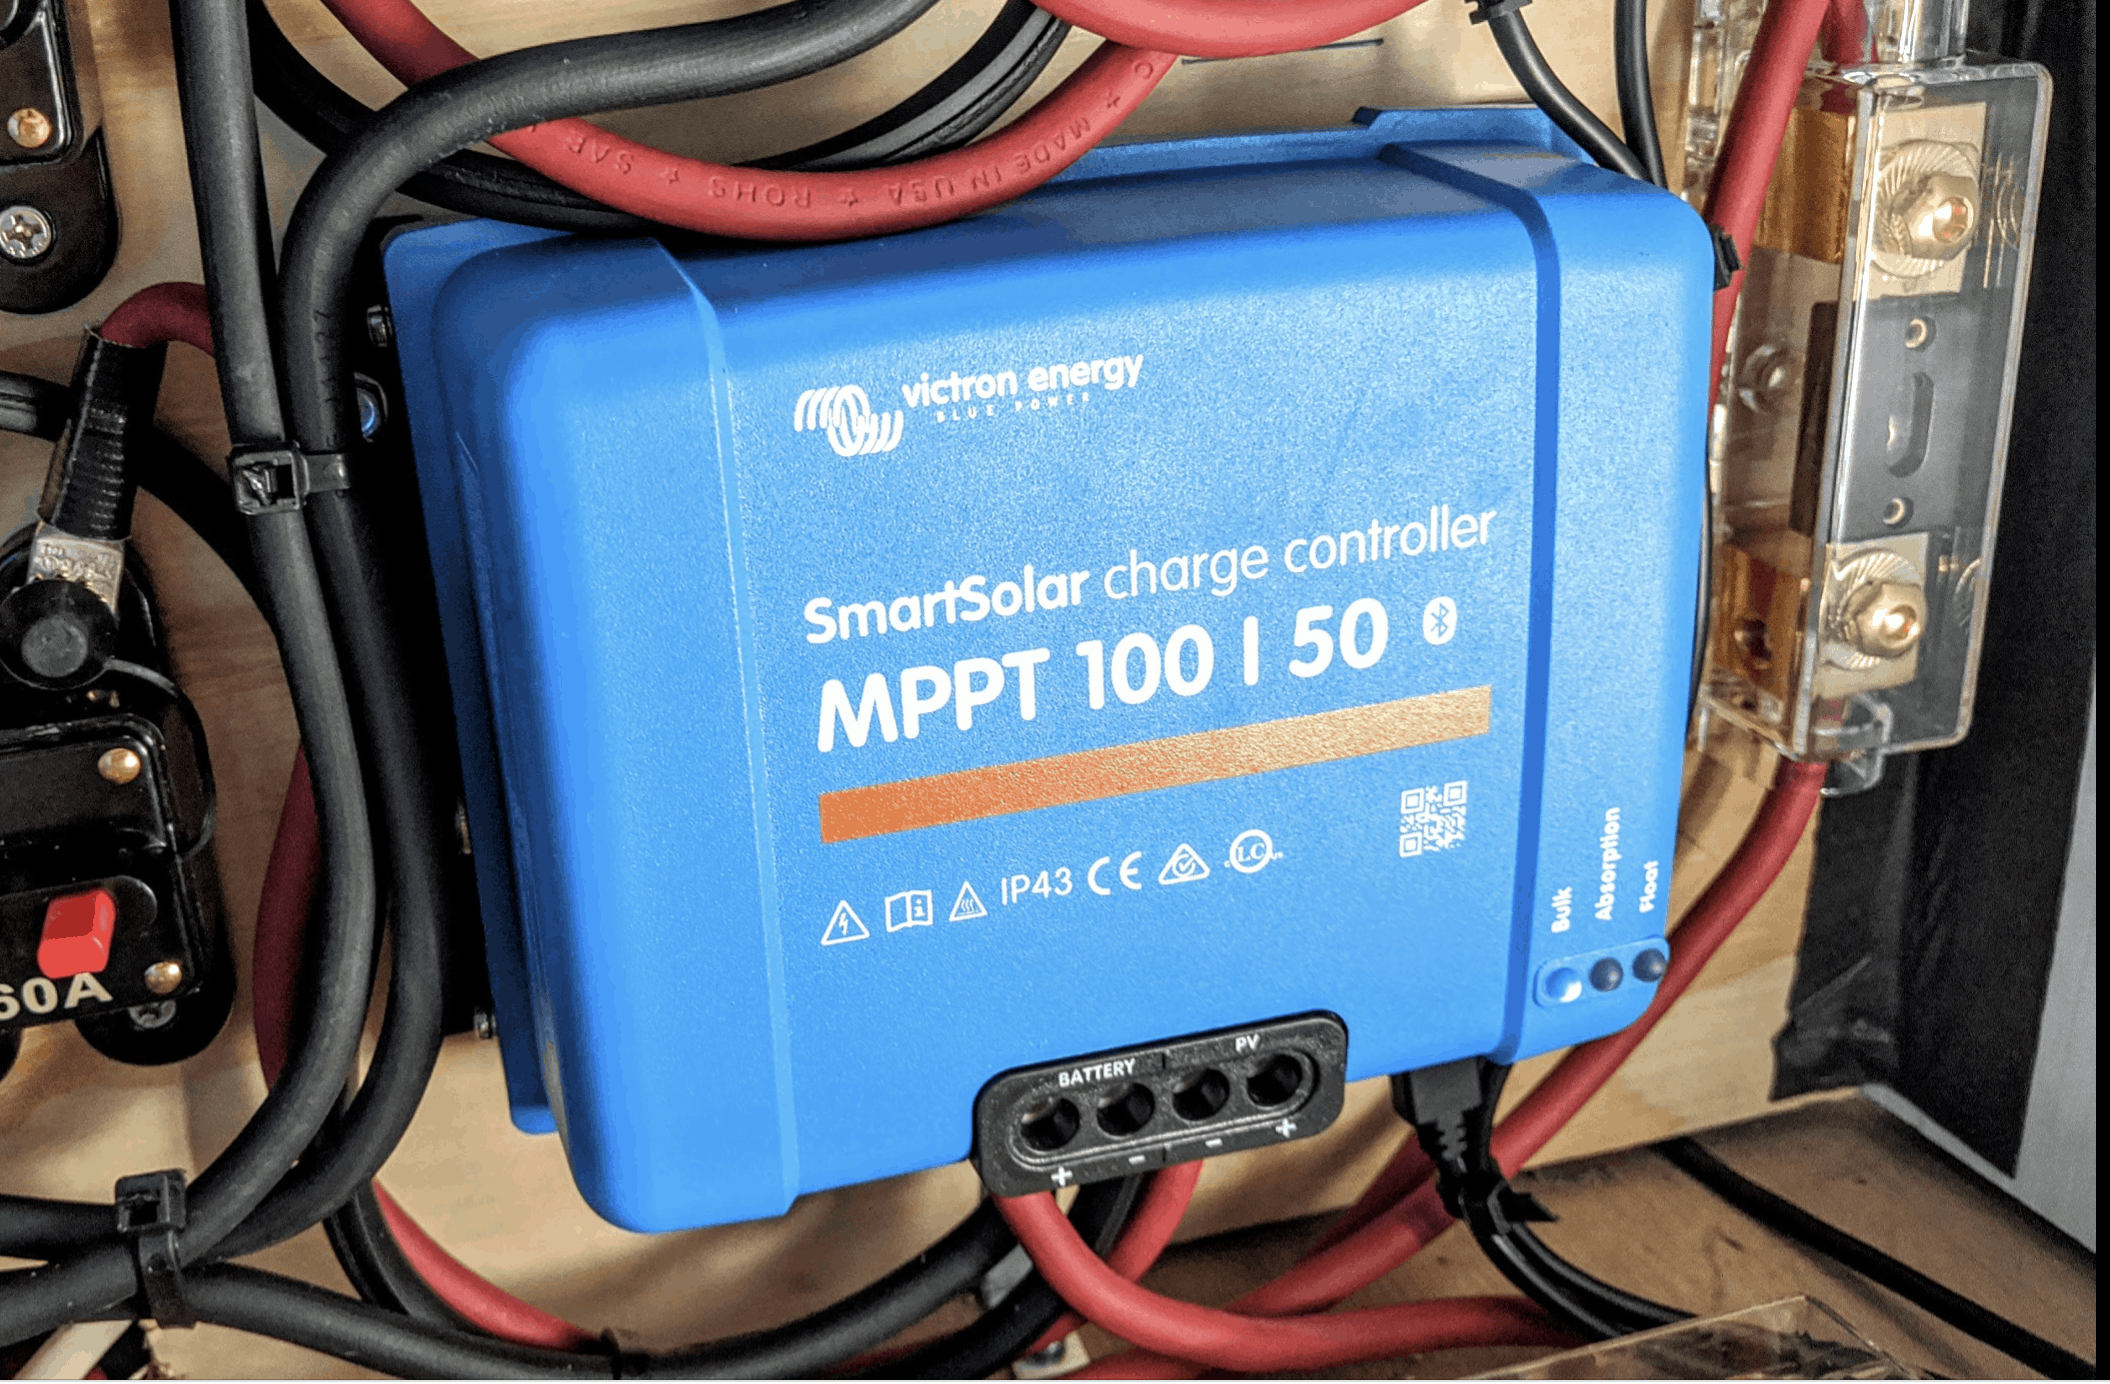 Guide to Programming a MPPT SmartSolar Charge Controller